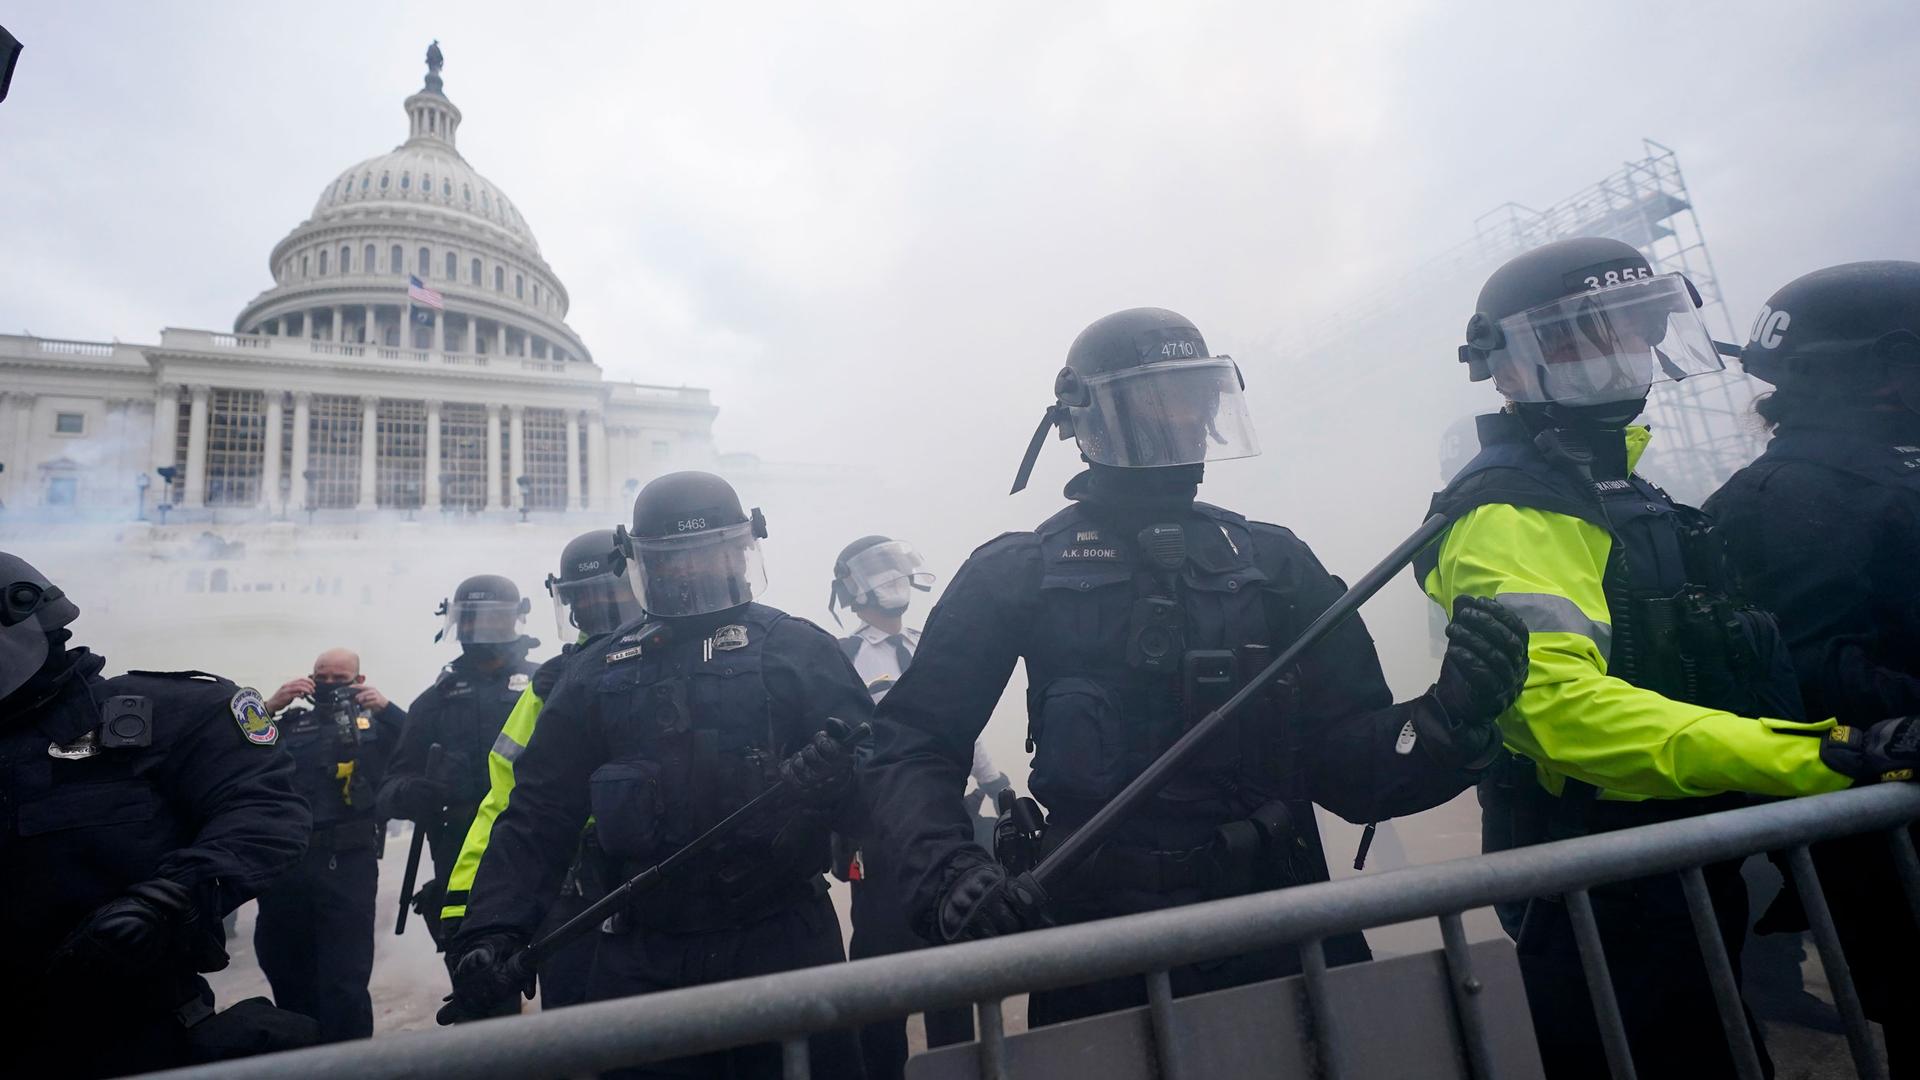 The US Capitol building is shown with smoke and riot police standing behind a baracade.